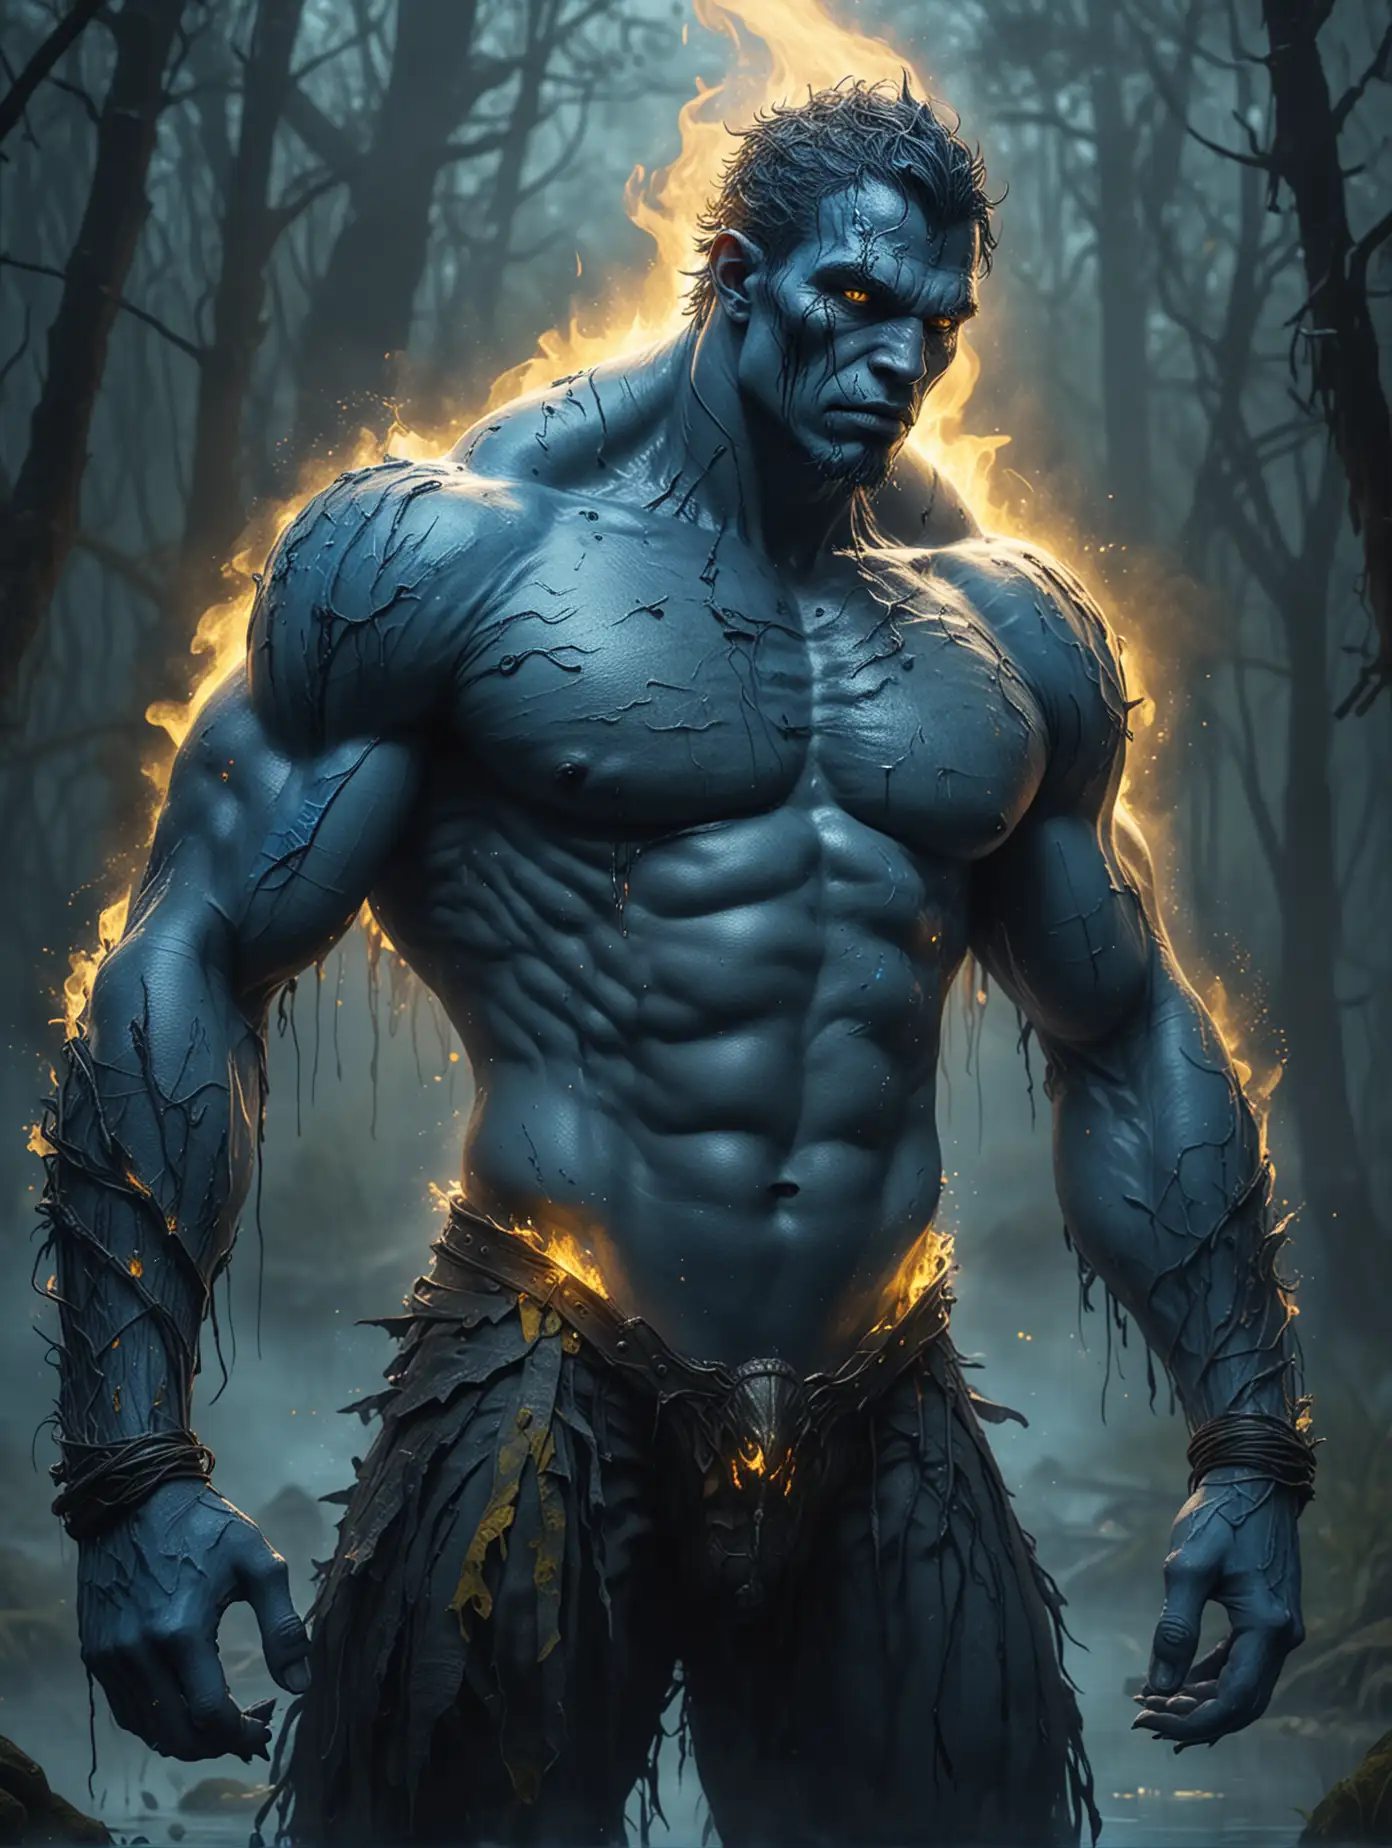 Handsome Blue Swamp Man in Thong Gazing Intensely